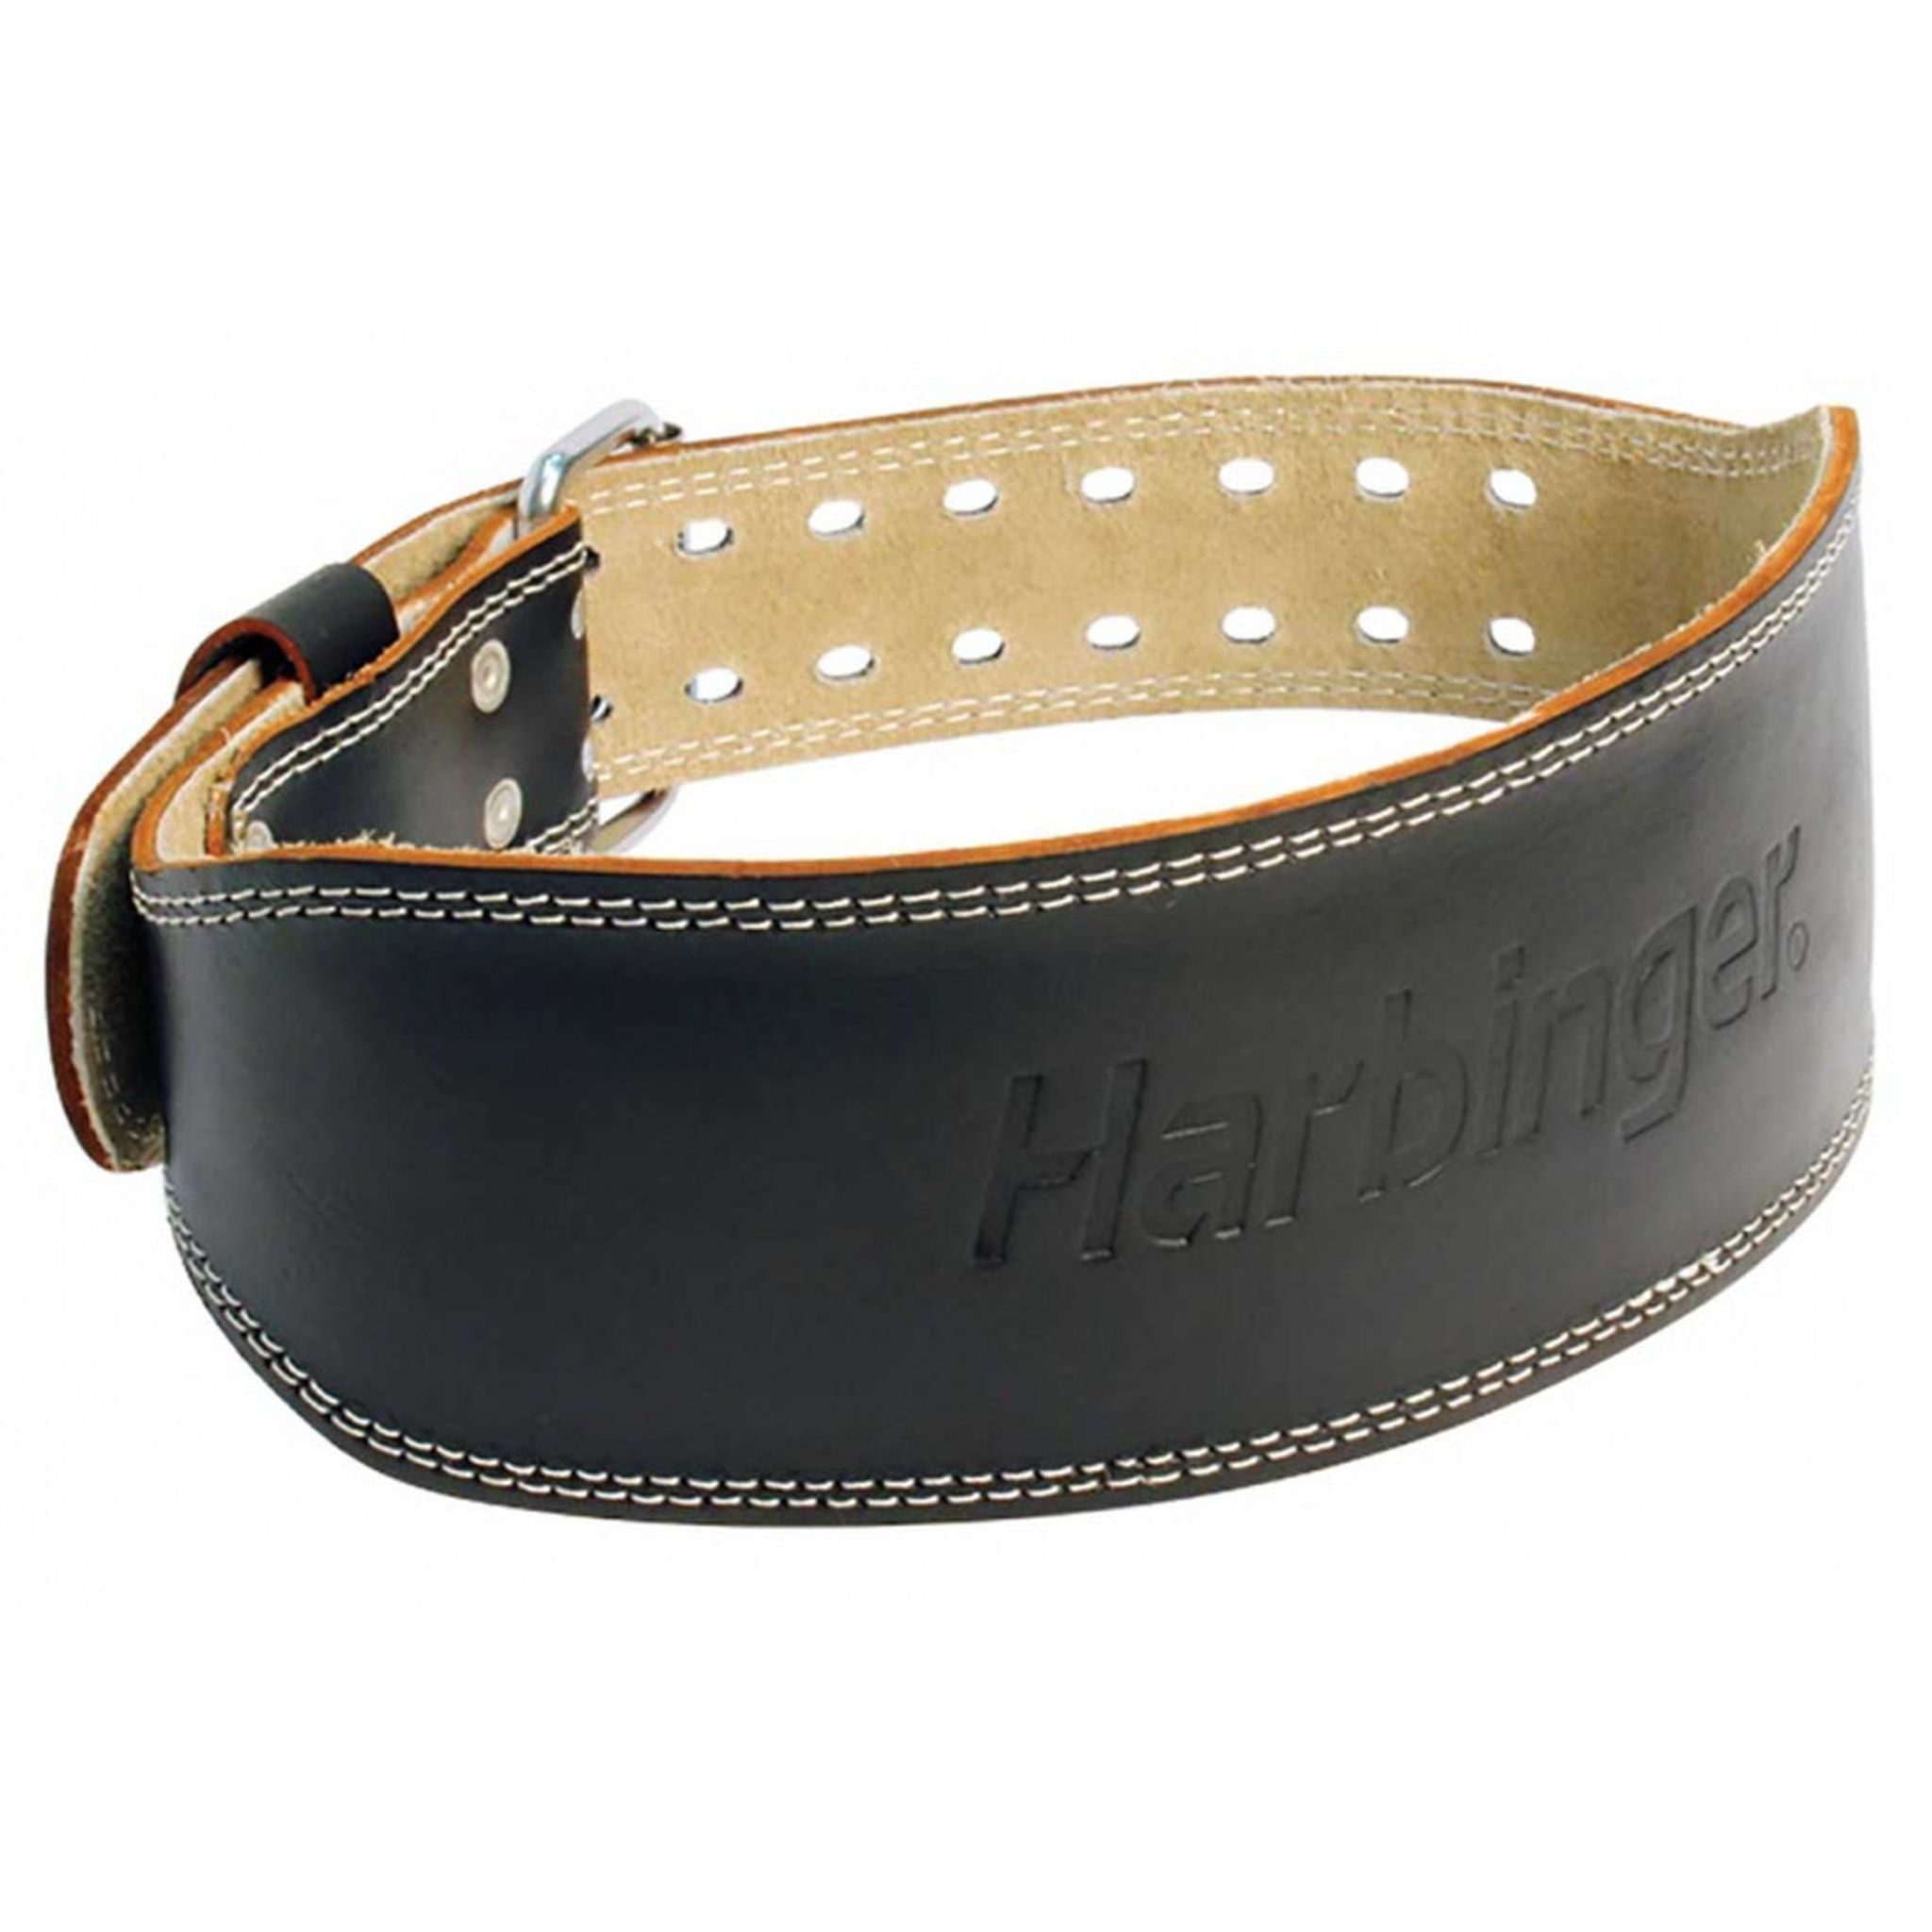 Harbinger 6-inch Padded Leather Weight Belt